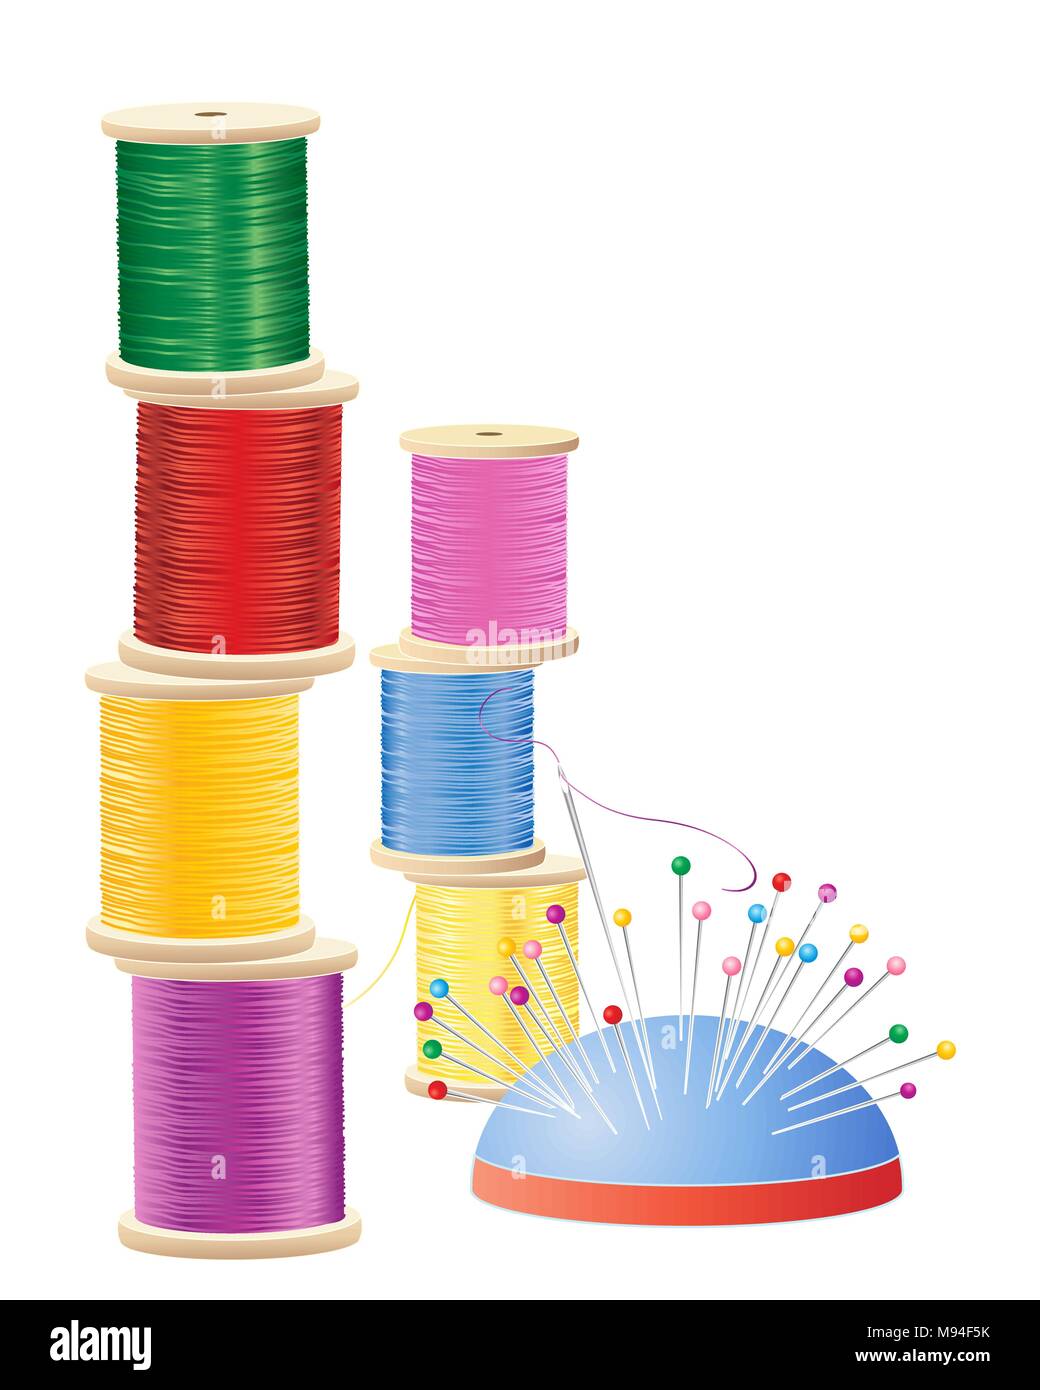 an illustration of a stack of colorful cotton reels with pin cushion and needle on a white background Stock Vector